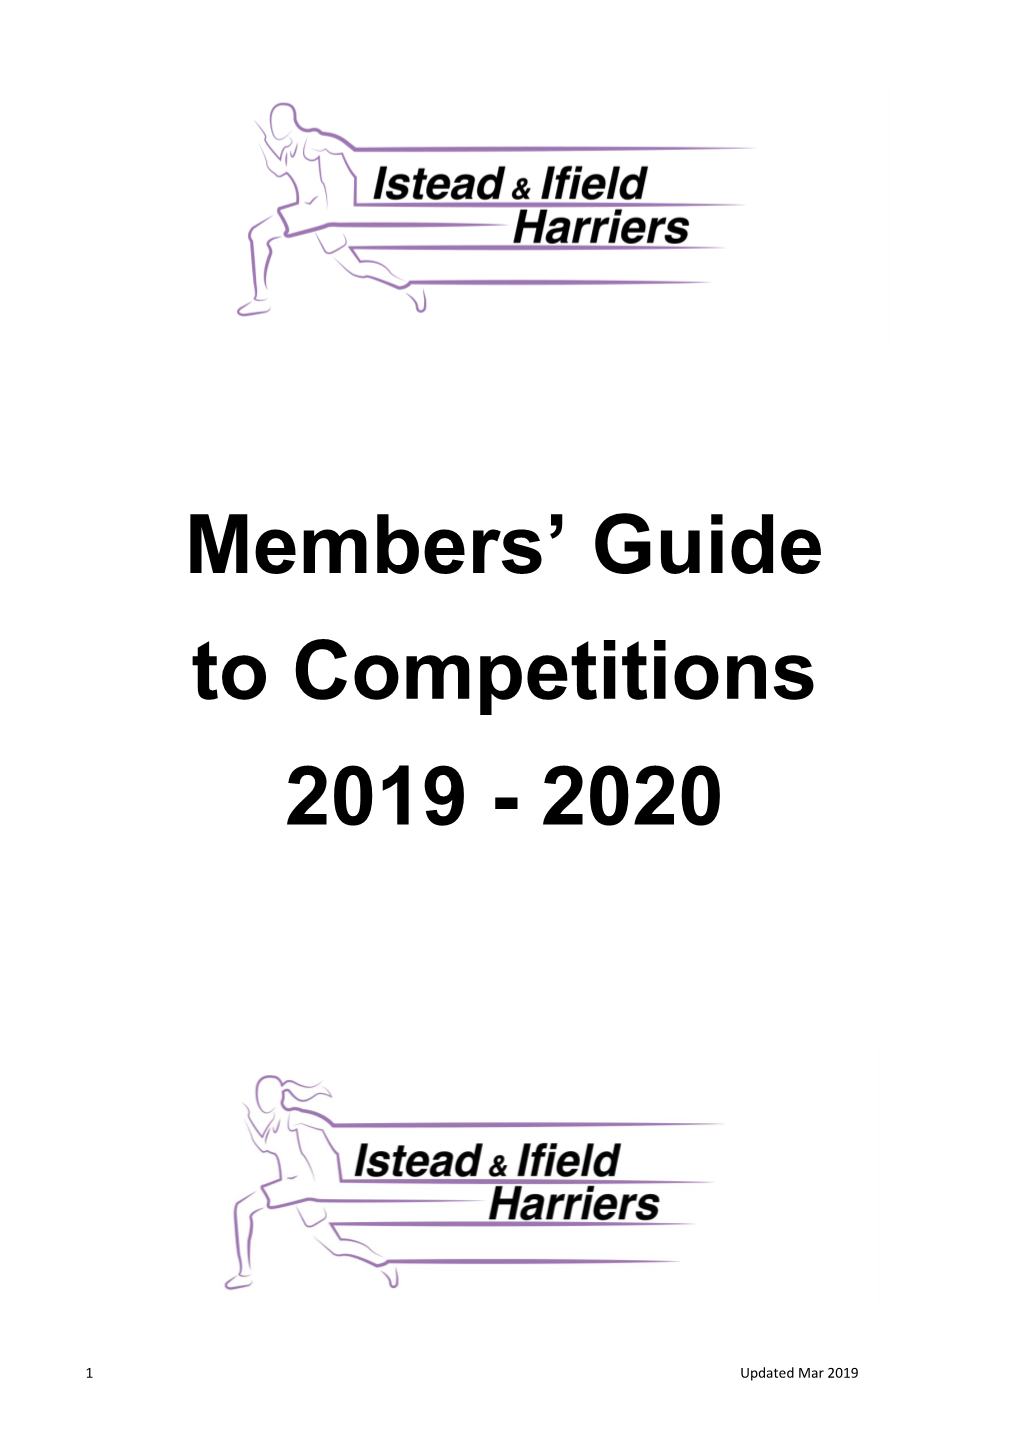 Members' Guide to Competitions 2019